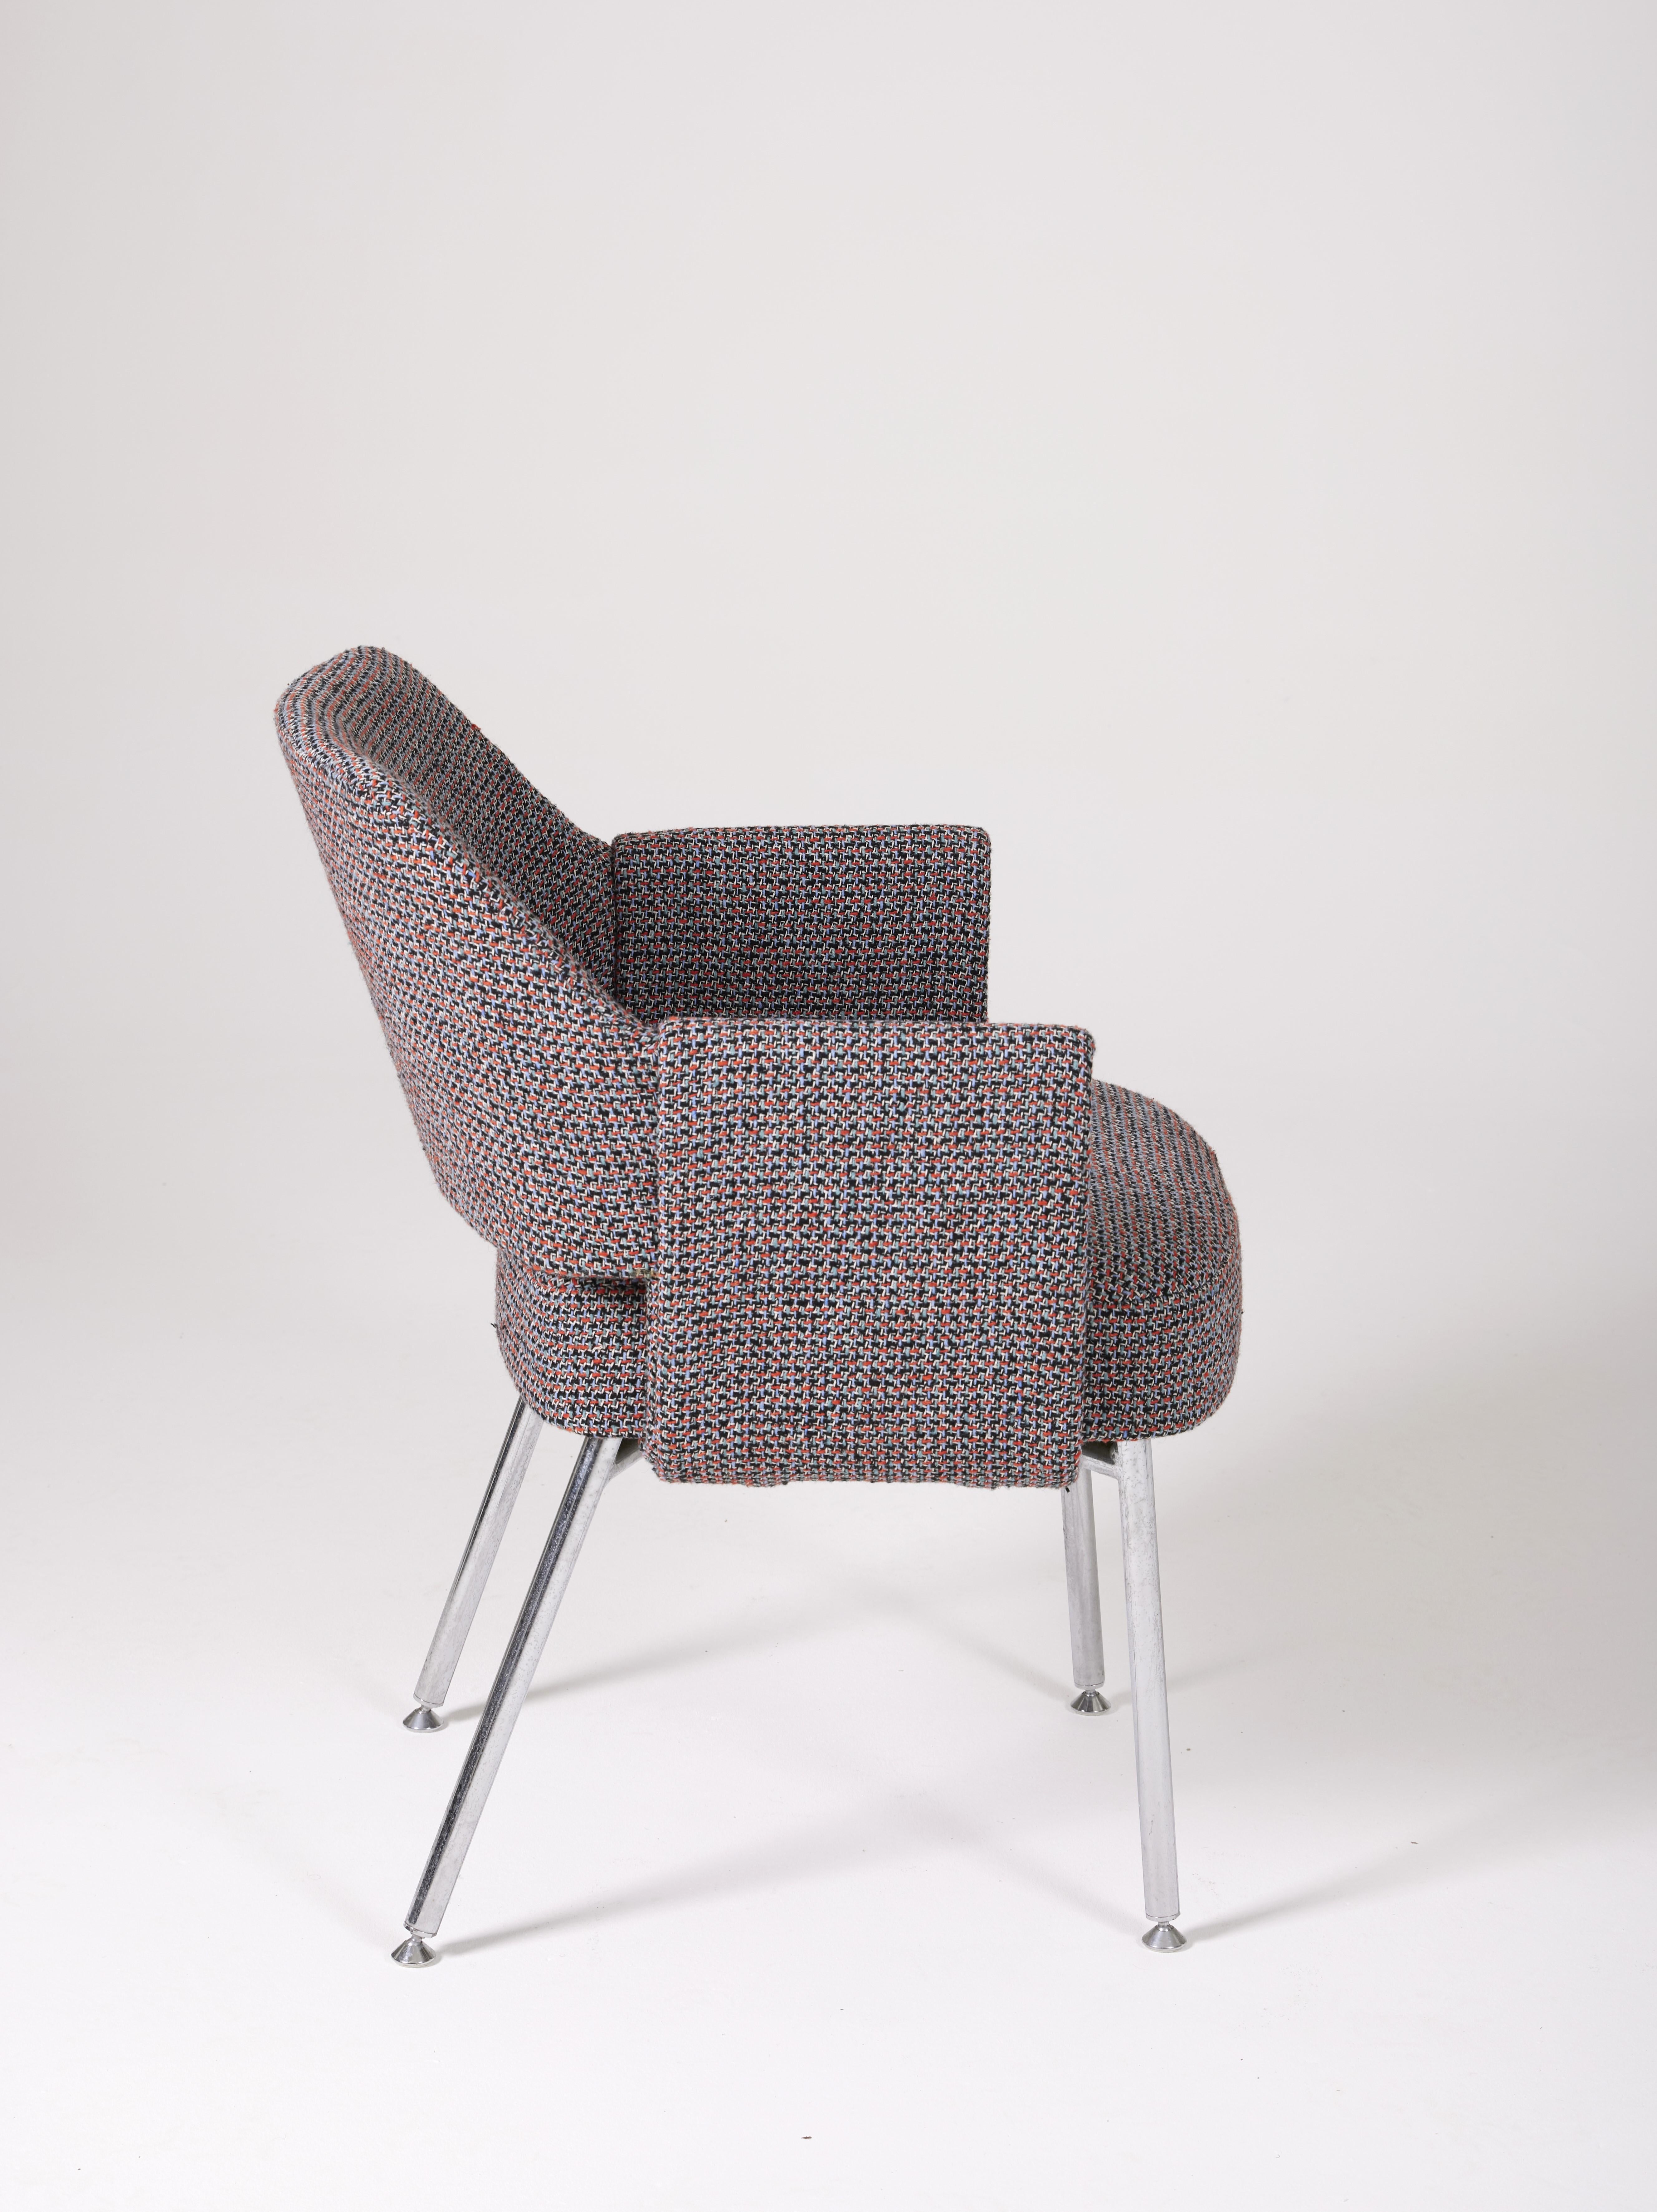 Deauville Airborne armchair in tweed In Good Condition For Sale In PARIS, FR